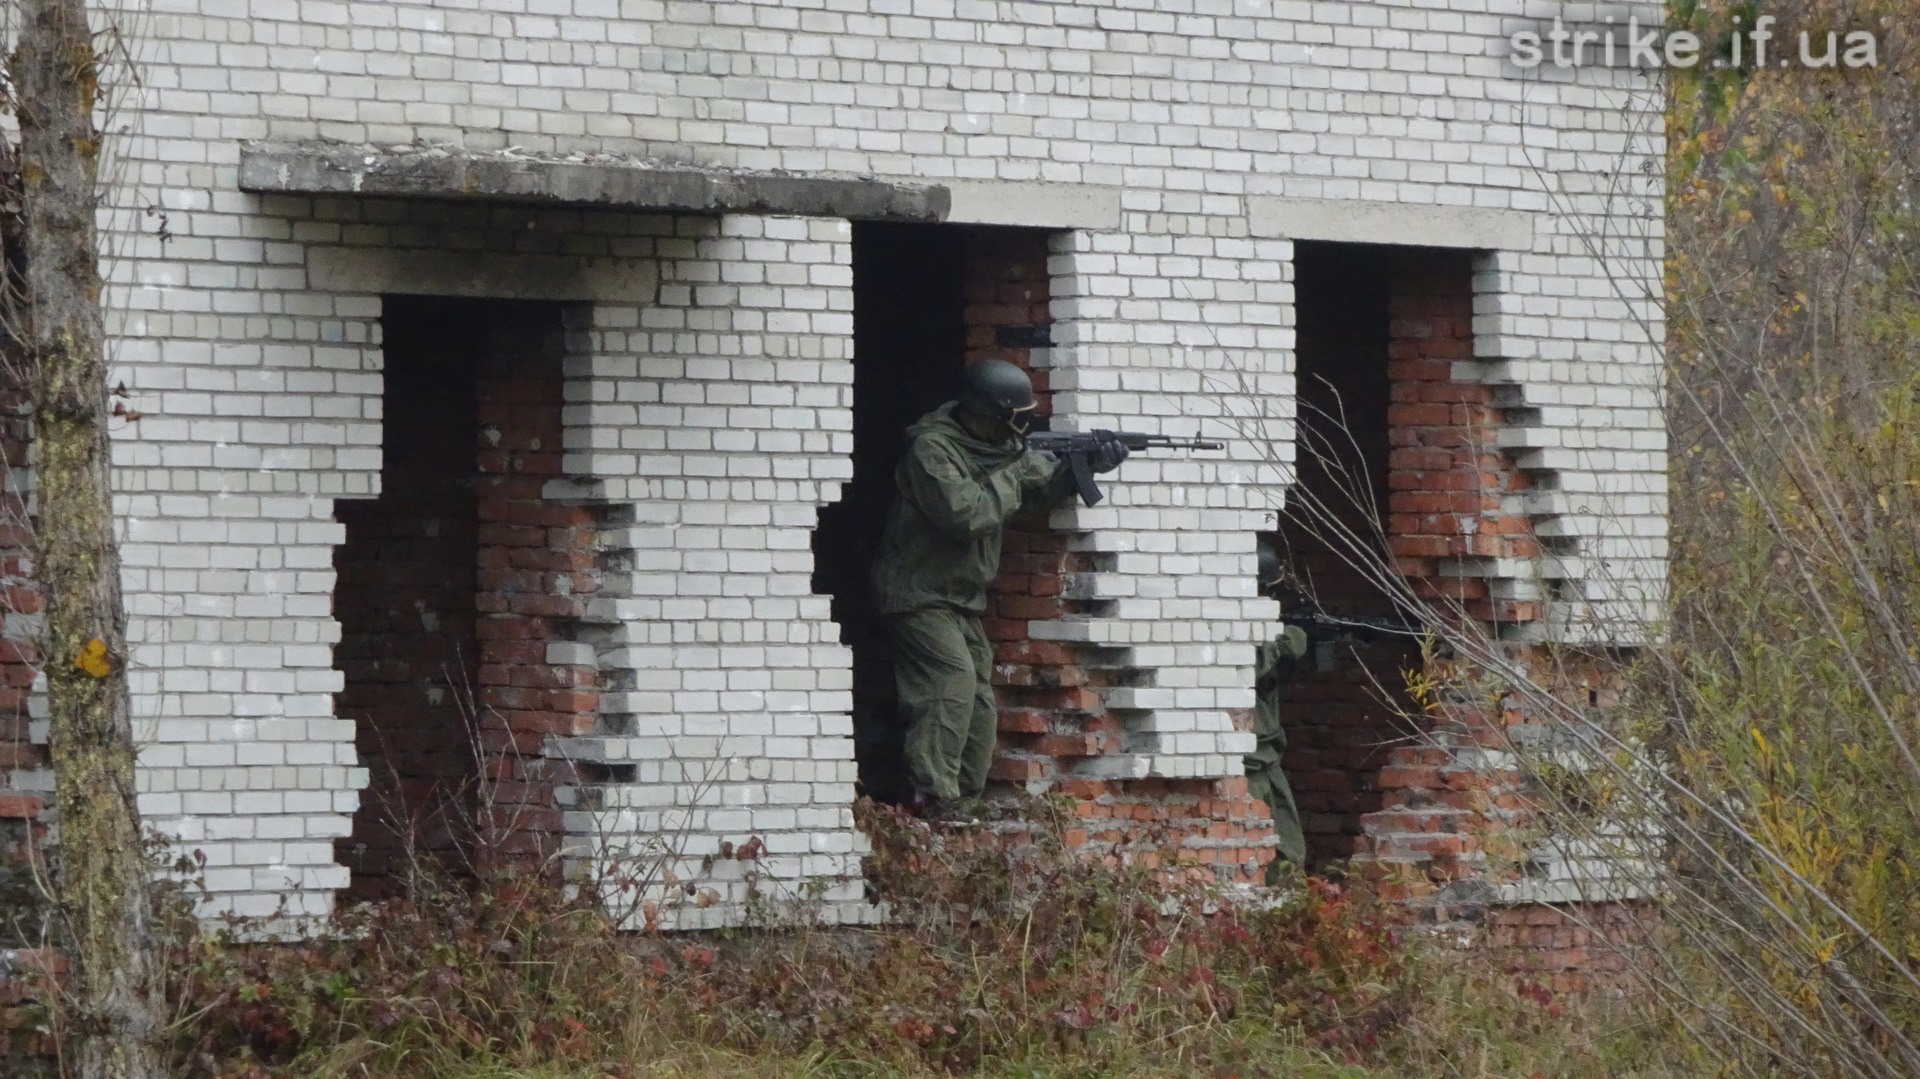 AIRSOFT GAME In Ivano-Frankivsk with an Owl airsoft club